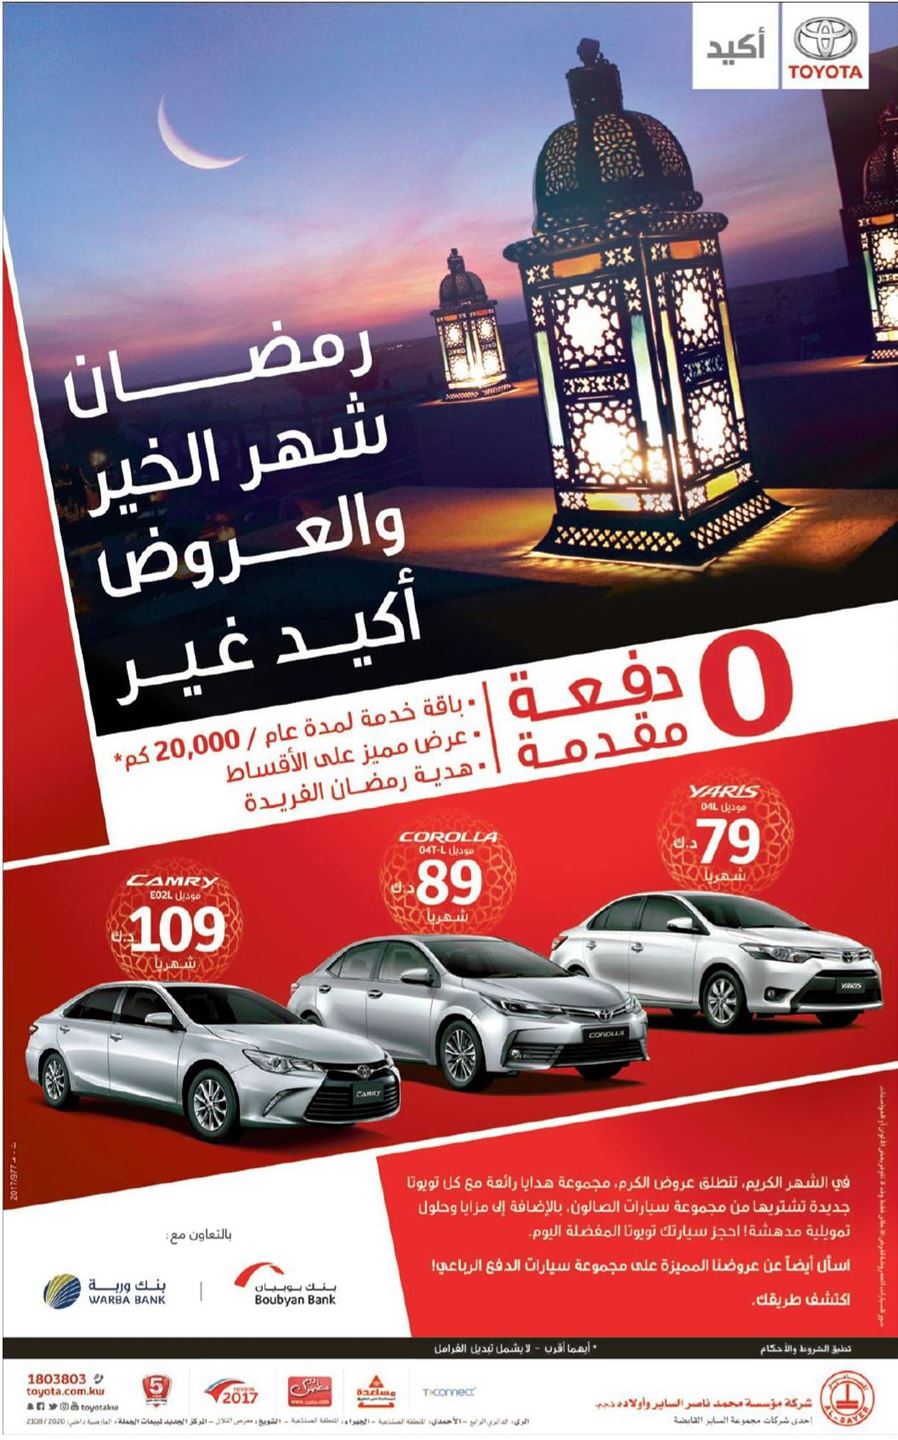 Toyota Offers in cooperation with Boubyan Bank and Warba Bank